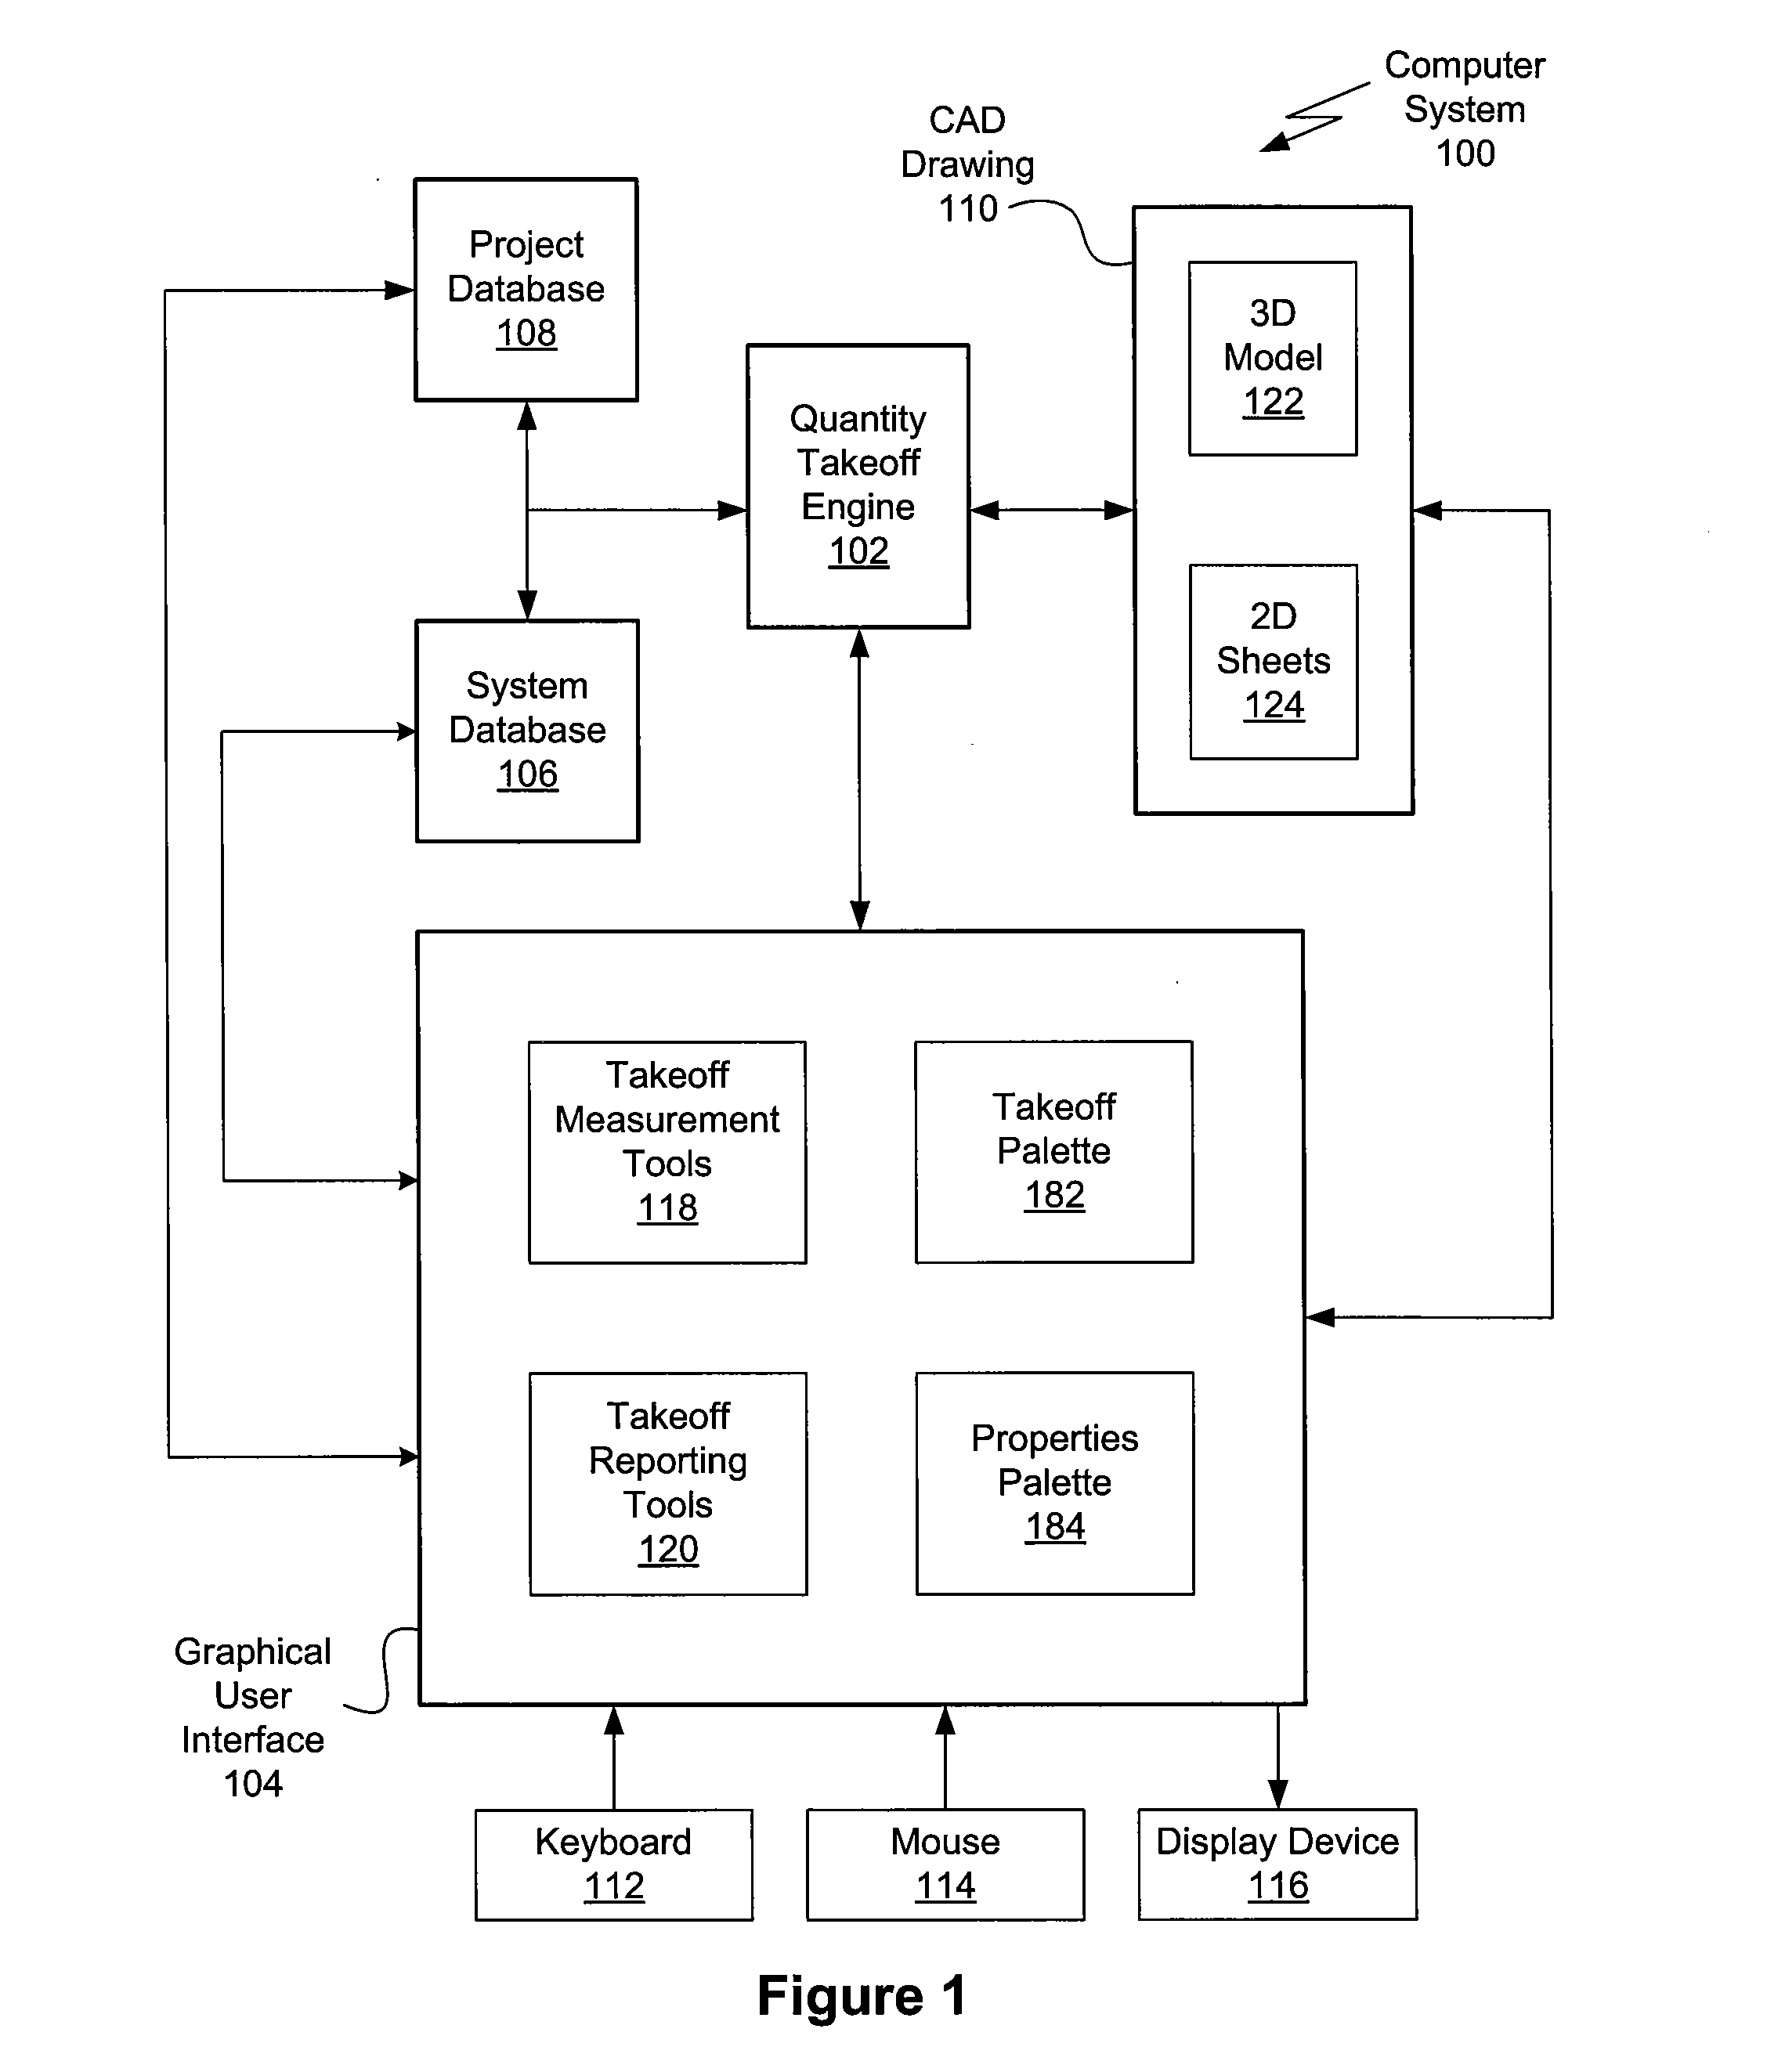 Takeoff List Palette For Guiding Semi-Automatic Quantity Takeoff From Computer Aided Design Drawings